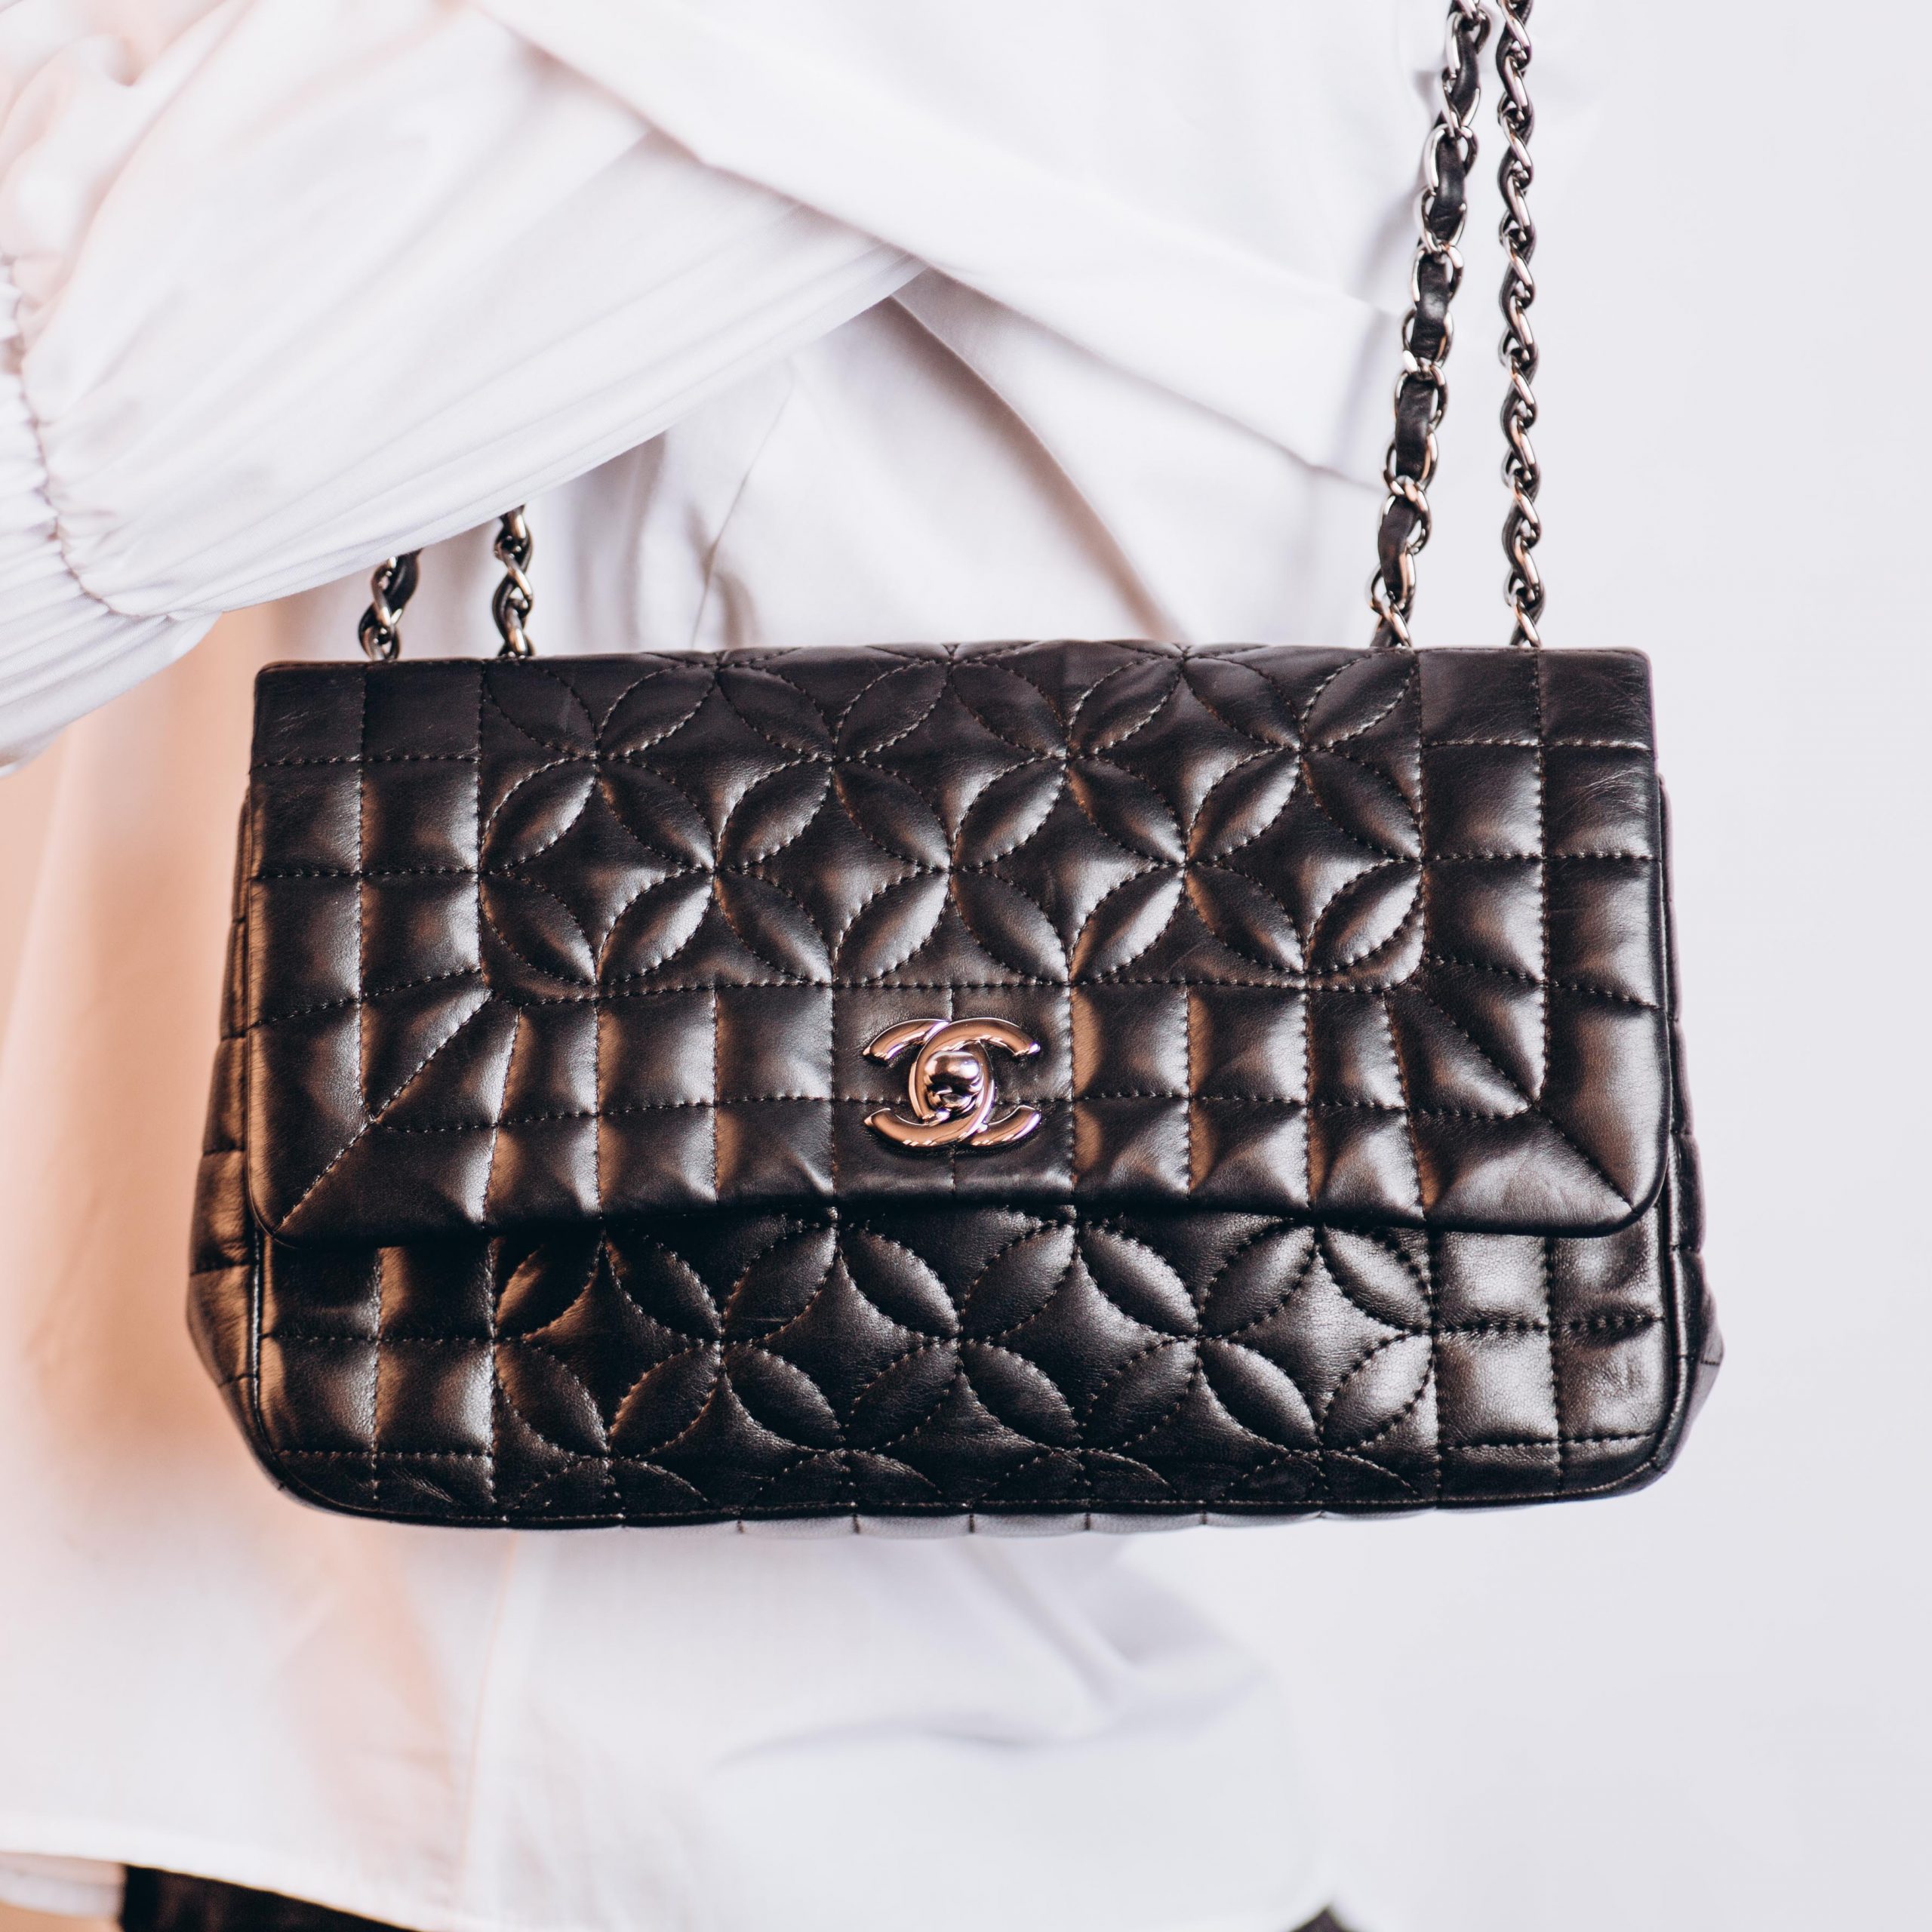 Sell Your Chanel Bag for Cash at Biltmore Loan and Jewelry